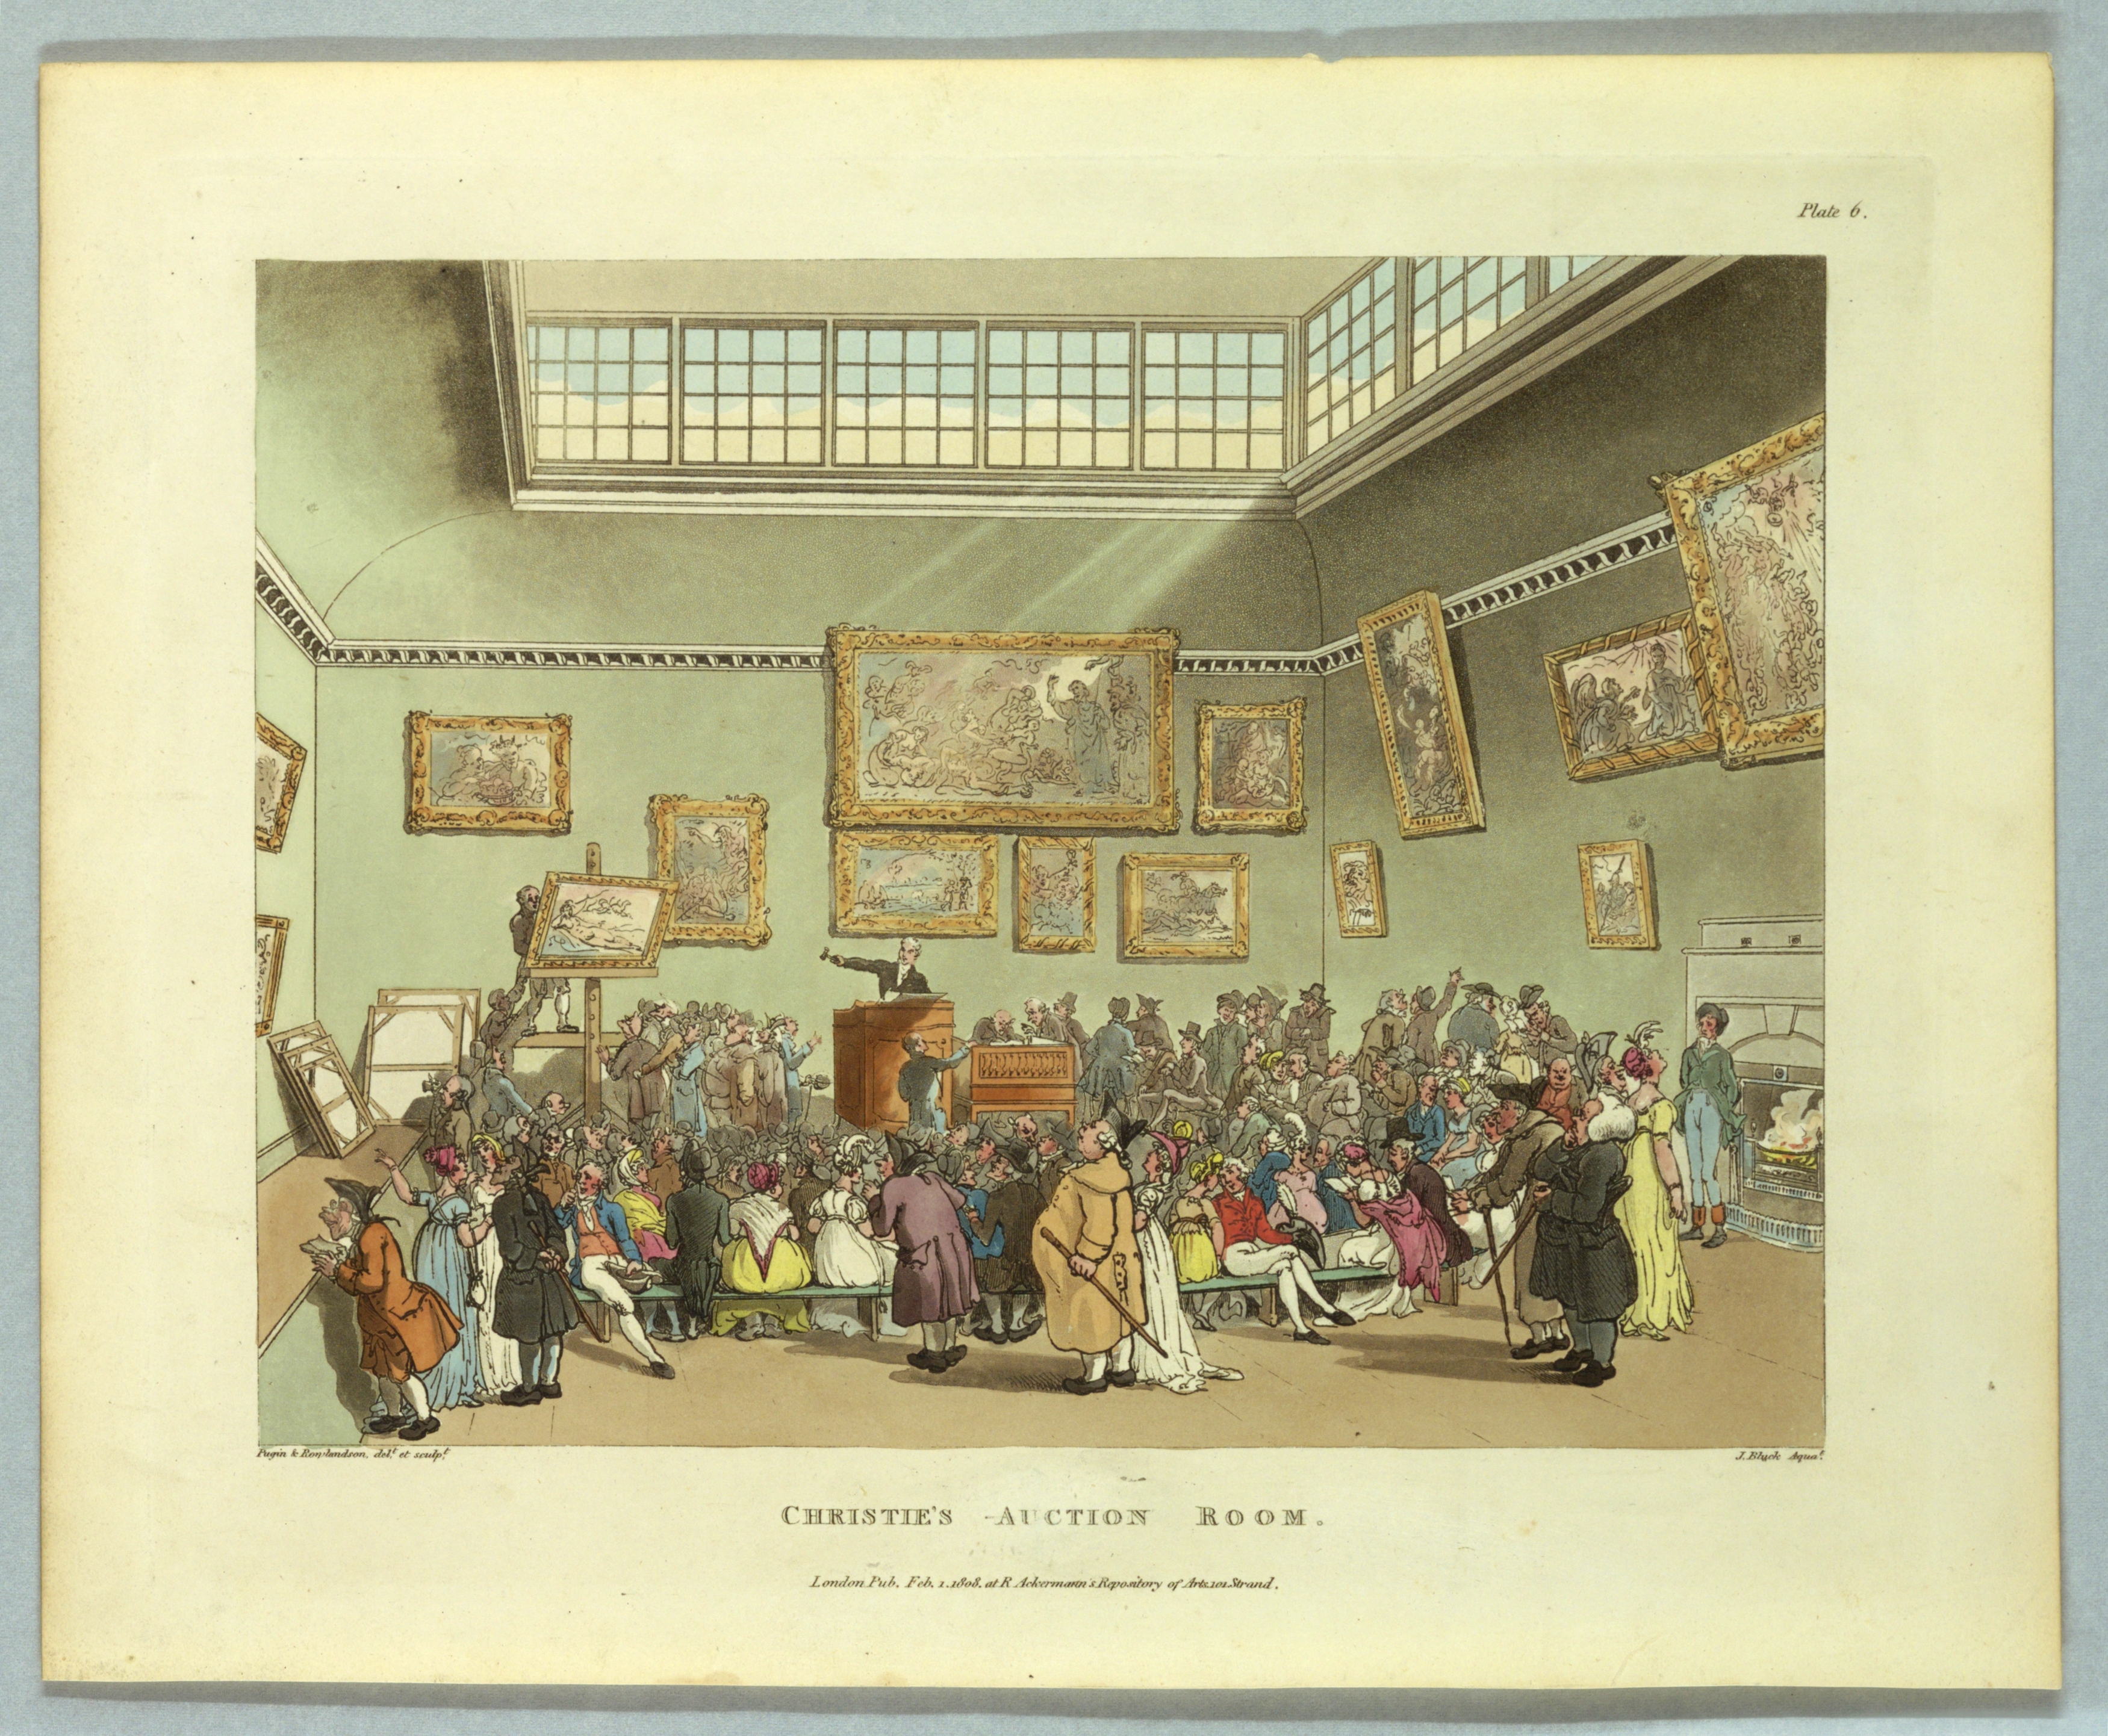 An interior scene showing Christie's Auction Room in the year 1808 from the print series 'Microcosm of London.' A crowd stands in a high-ceilinged room, with cool green walls and light streaming in through high windows. Paintings in ornate and gilded frames are hung salon-style, seemingly jumbled, with vaguely recognizable classical compositions: here an Annunciation, there an Adoration, a saint, or an equestrian scene, a portrait. A framed reclining Venus (nude woman) is displayed on the auction stand, next to an auctioneer who gestures with his gavel. A lively and colorful crowd fills the room, with detailed dress and caricatured features.